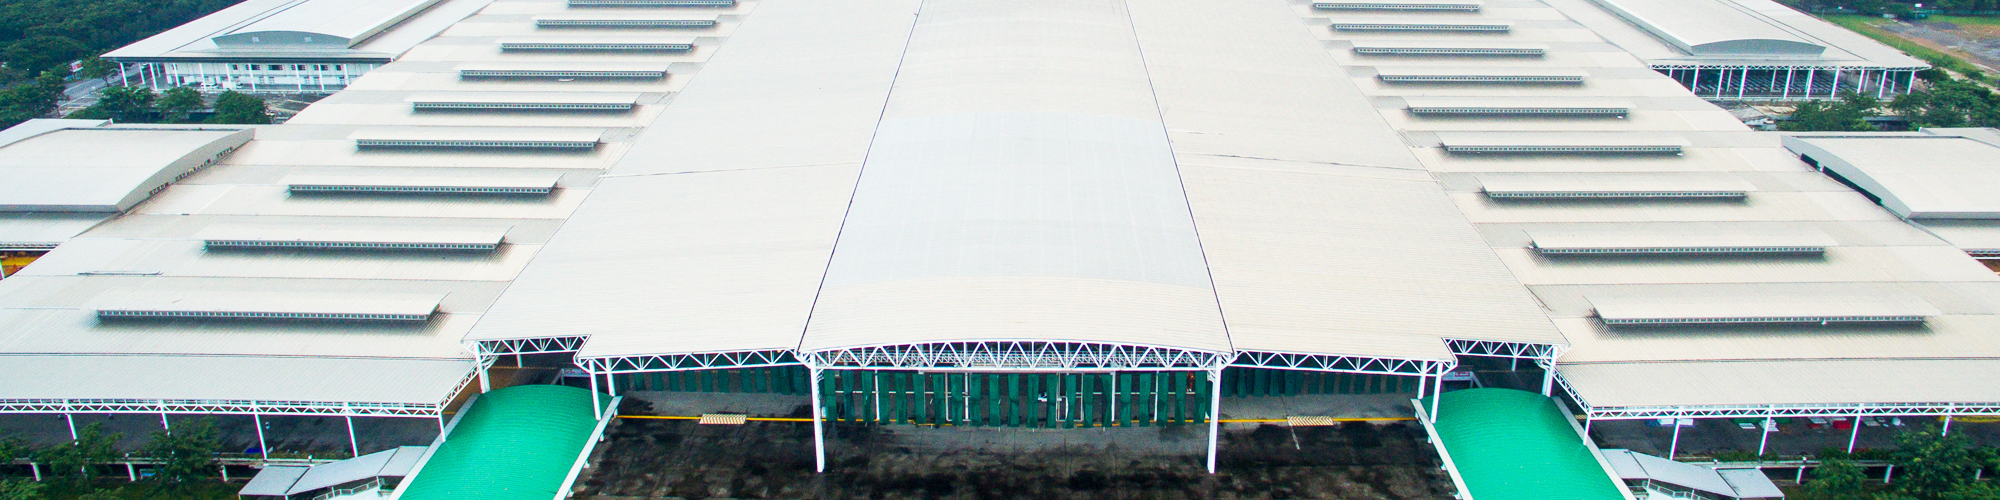 Large Factory Roof